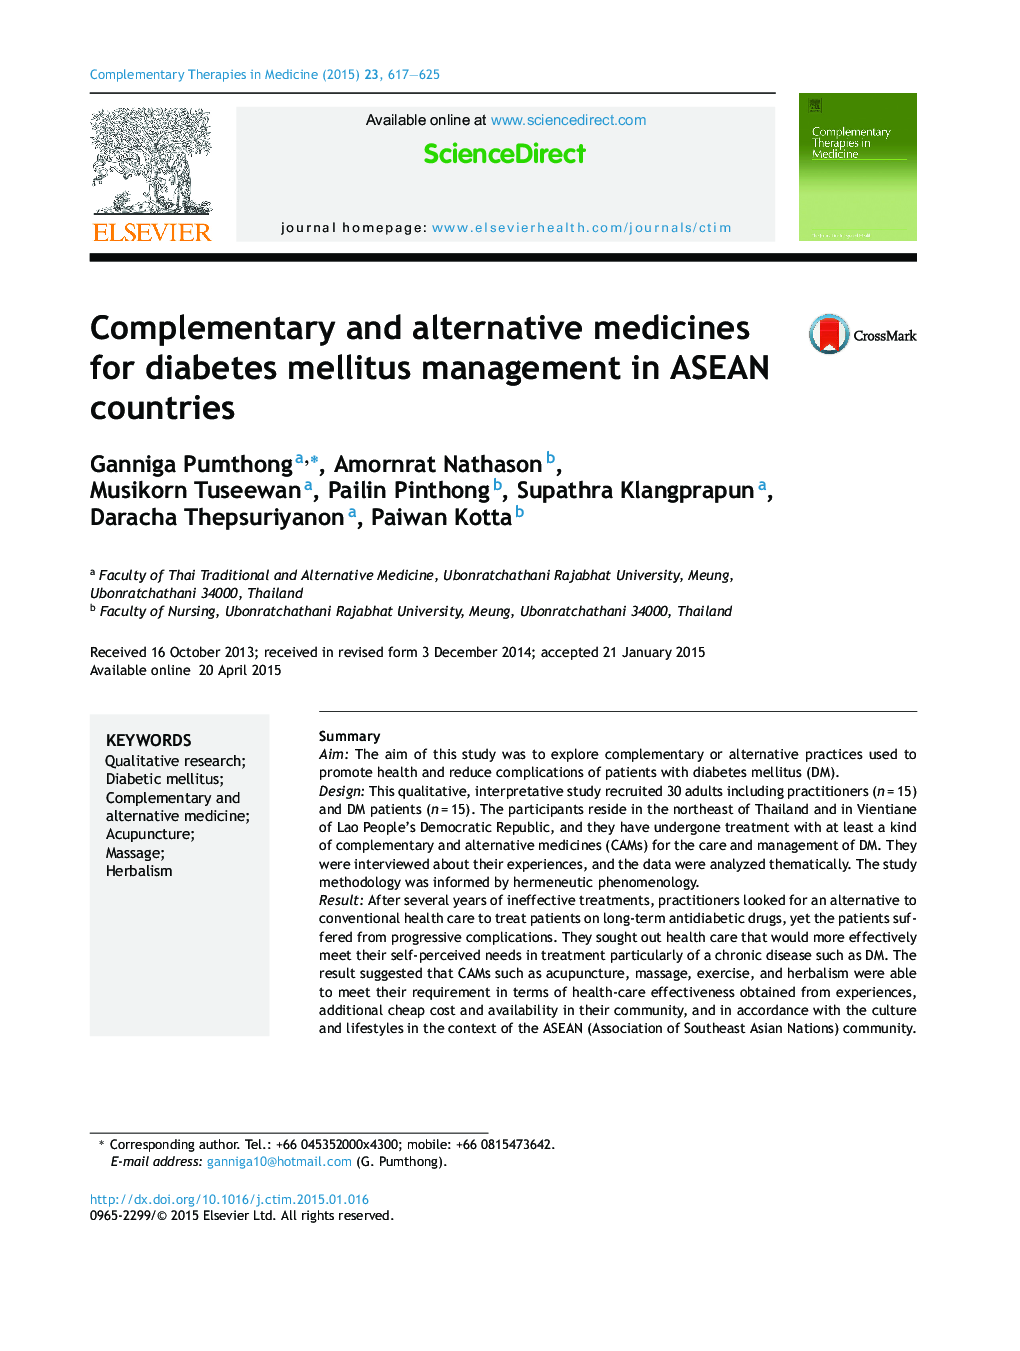 Complementary and alternative medicines for diabetes mellitus management in ASEAN countries